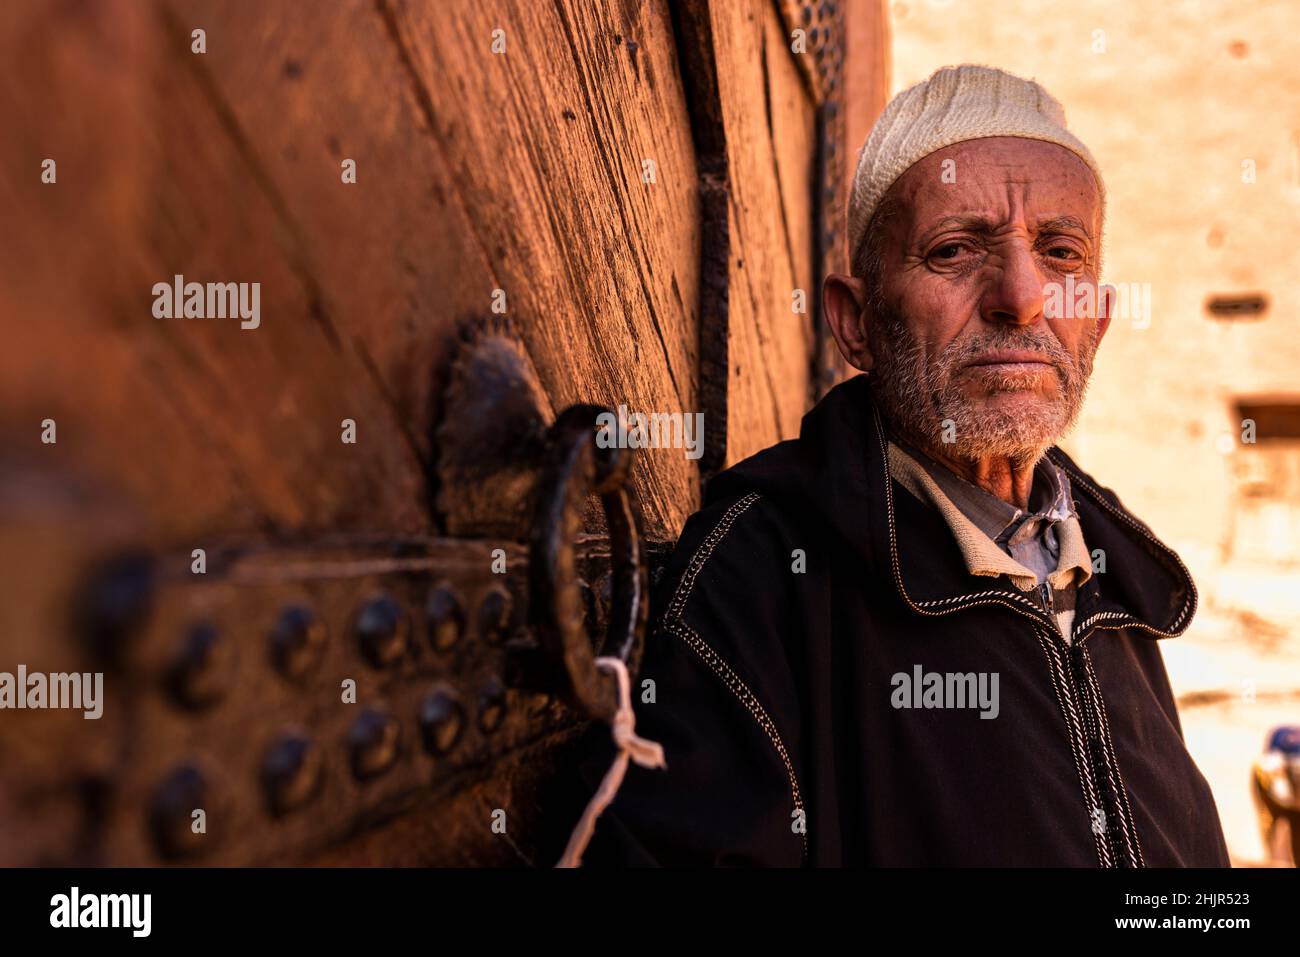 Portrait of an old Arab man living in a kasbah in Morocco. Stock Photo